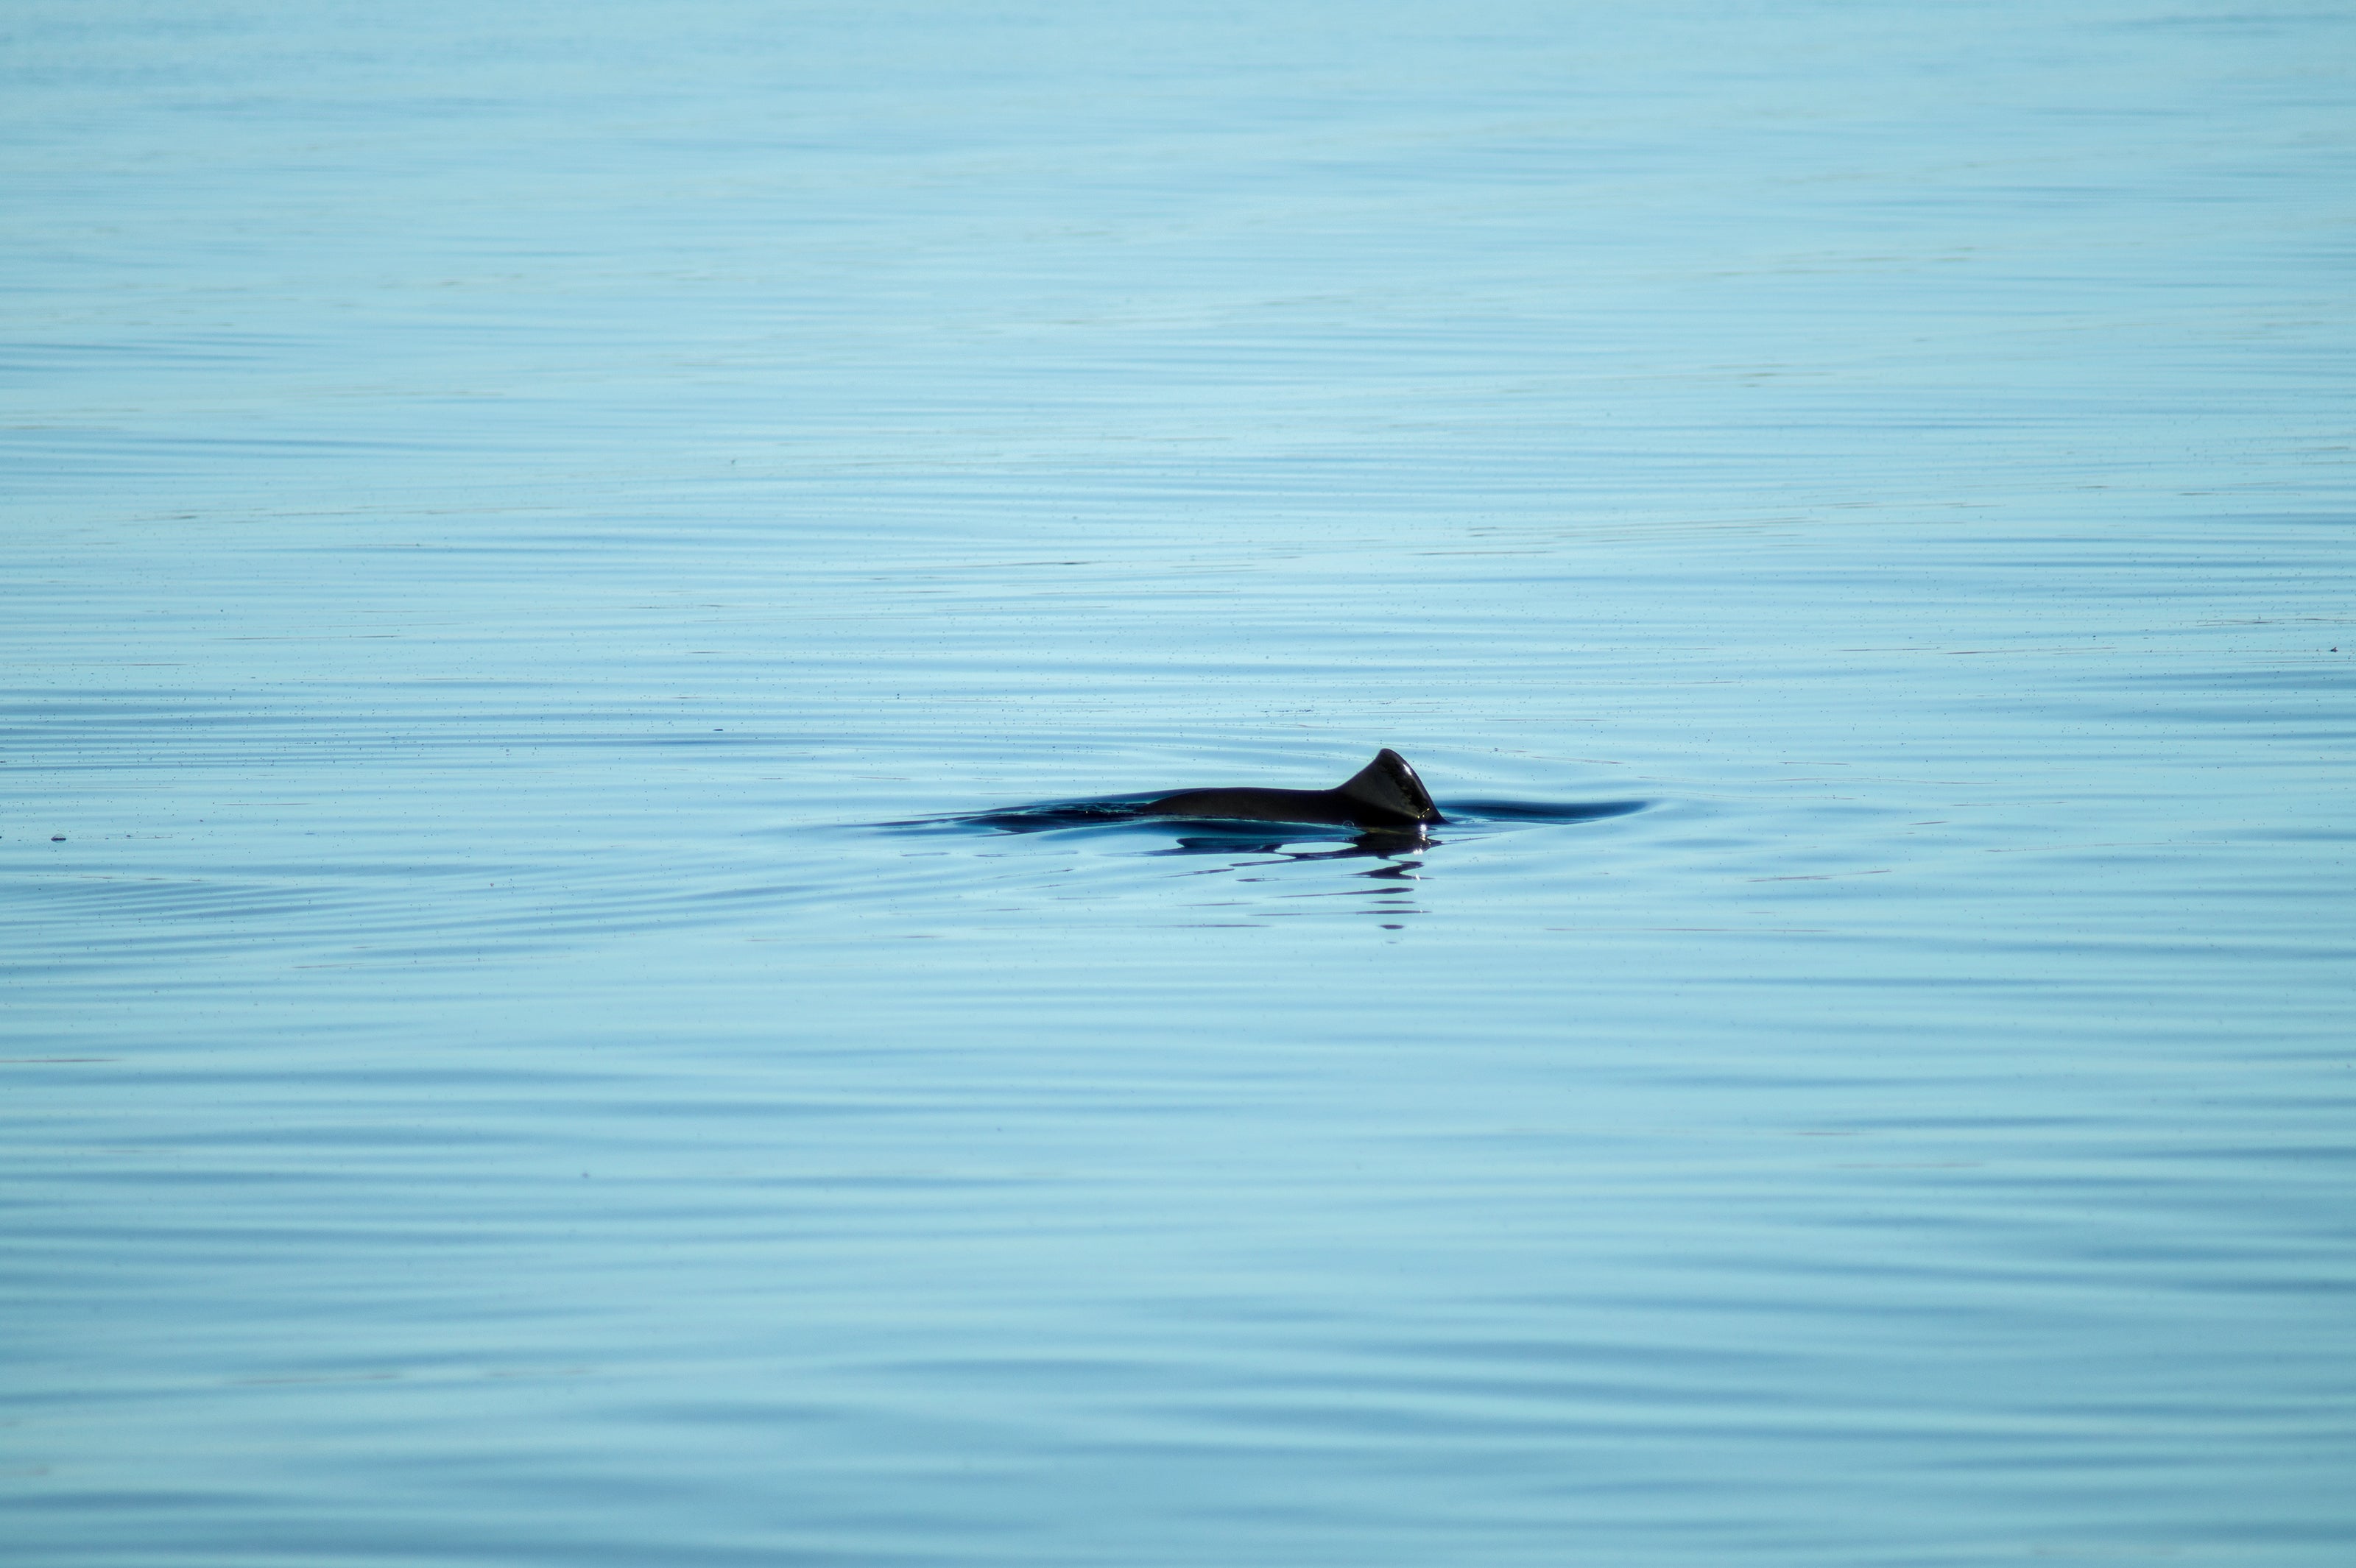 Harbour porpoises can lose their sense of direction from underwater noise caused by oil and gas fields